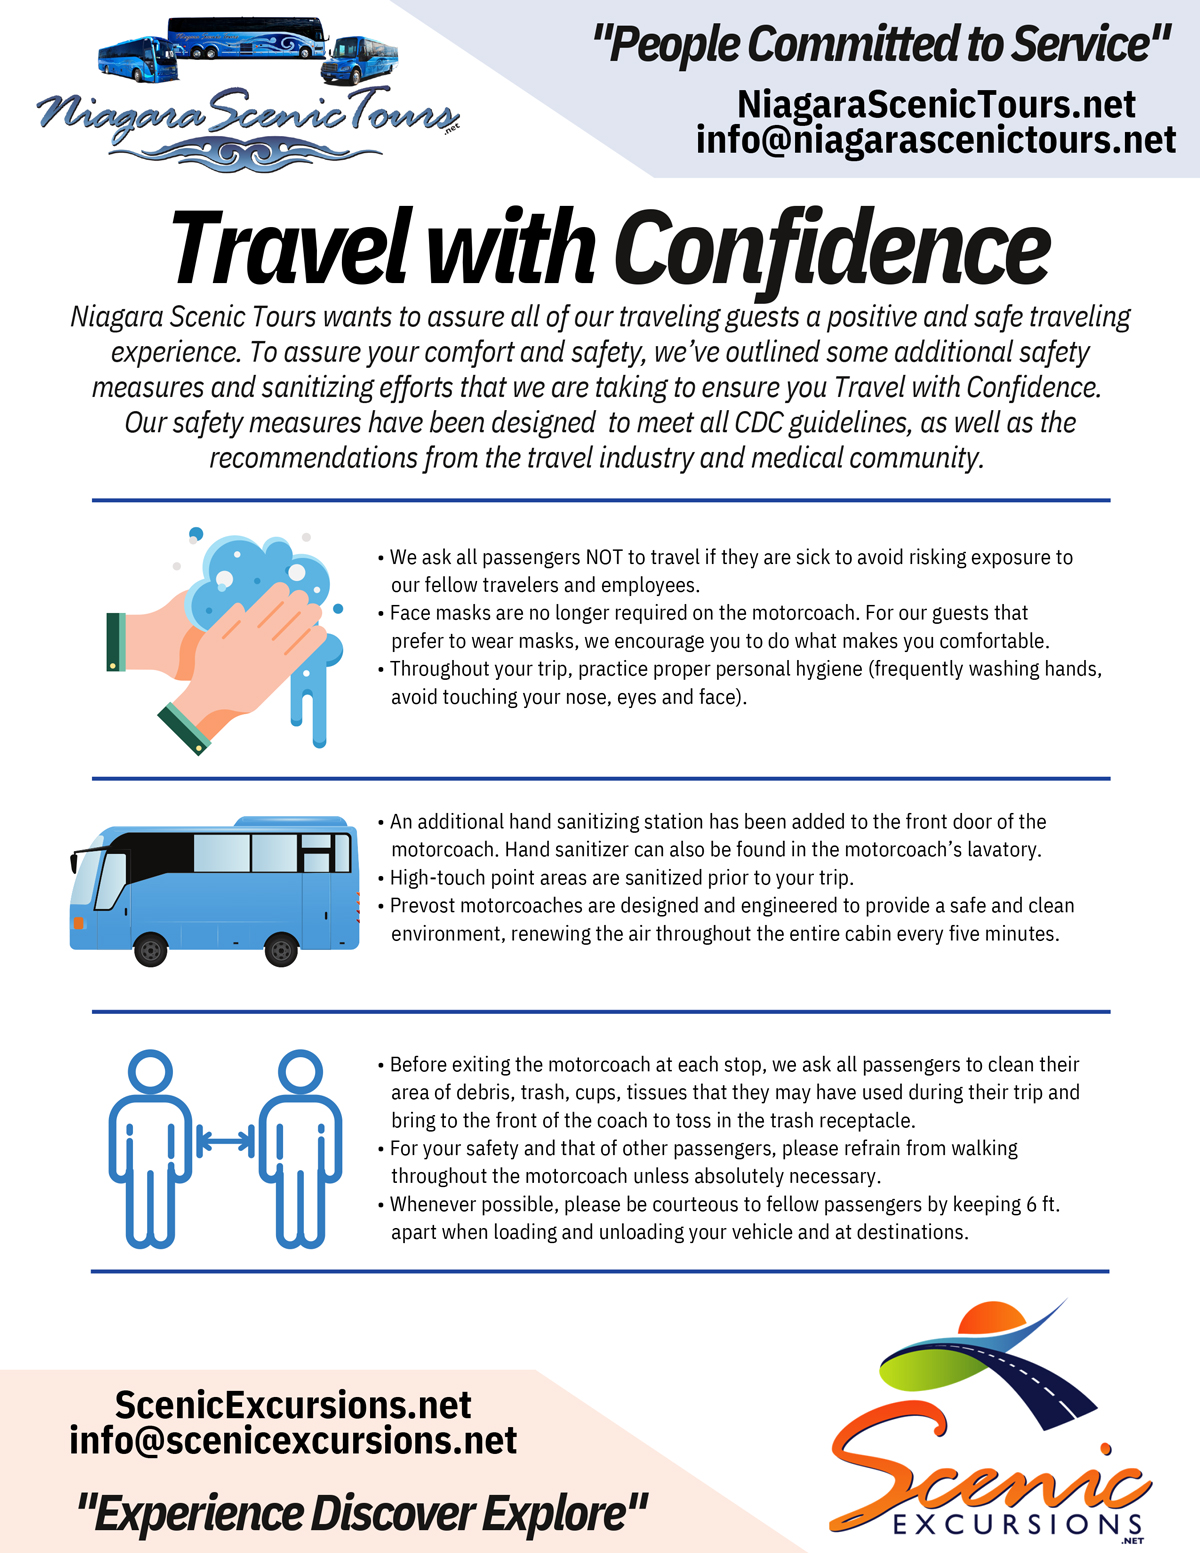 Travel with Confidence Flyer